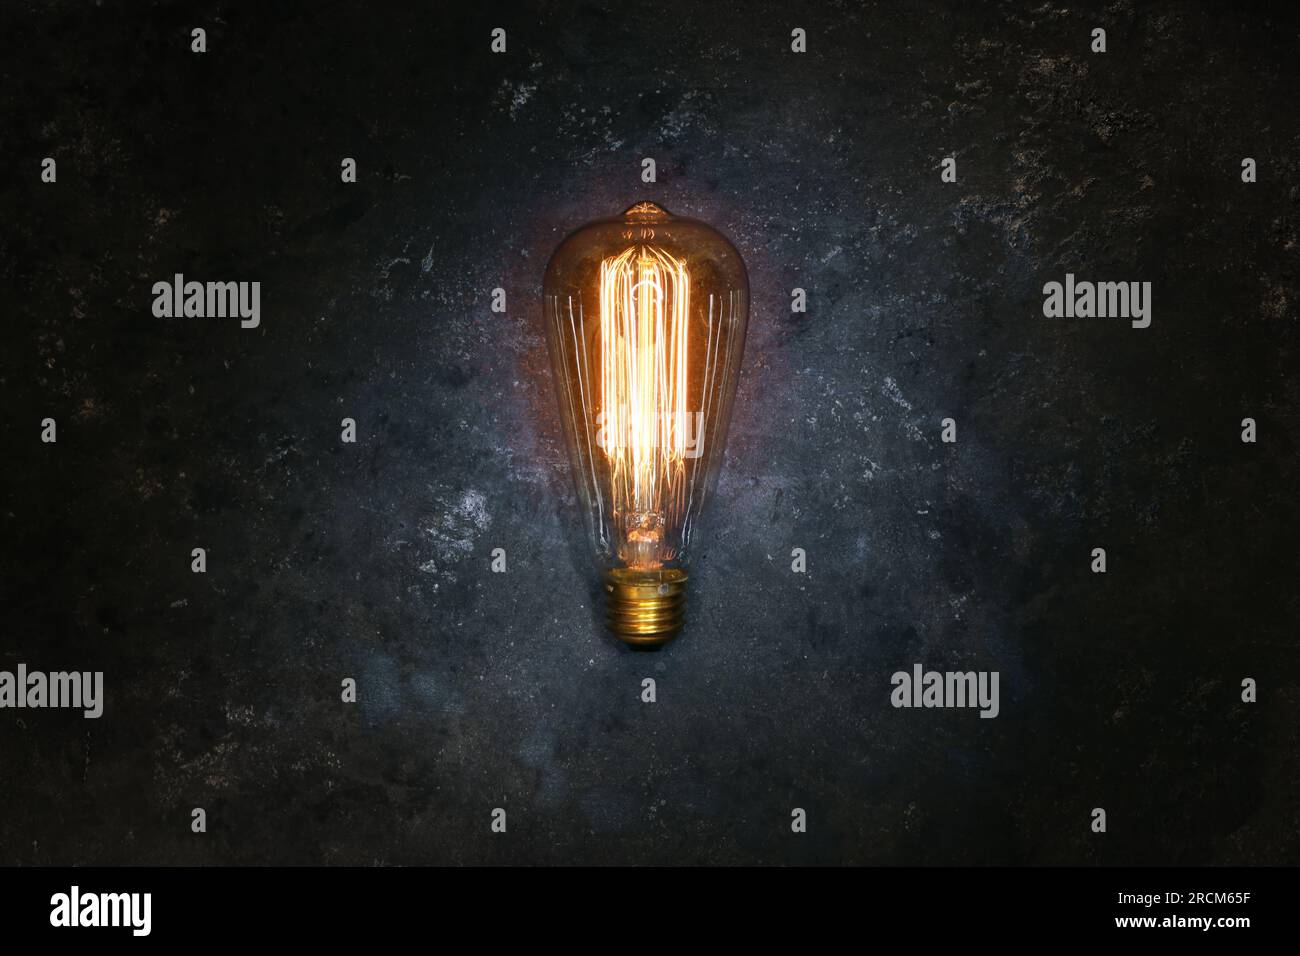 Vintage old light bulb glowing yellow on rough dark background. Idea, creativity concept. Stock Photo